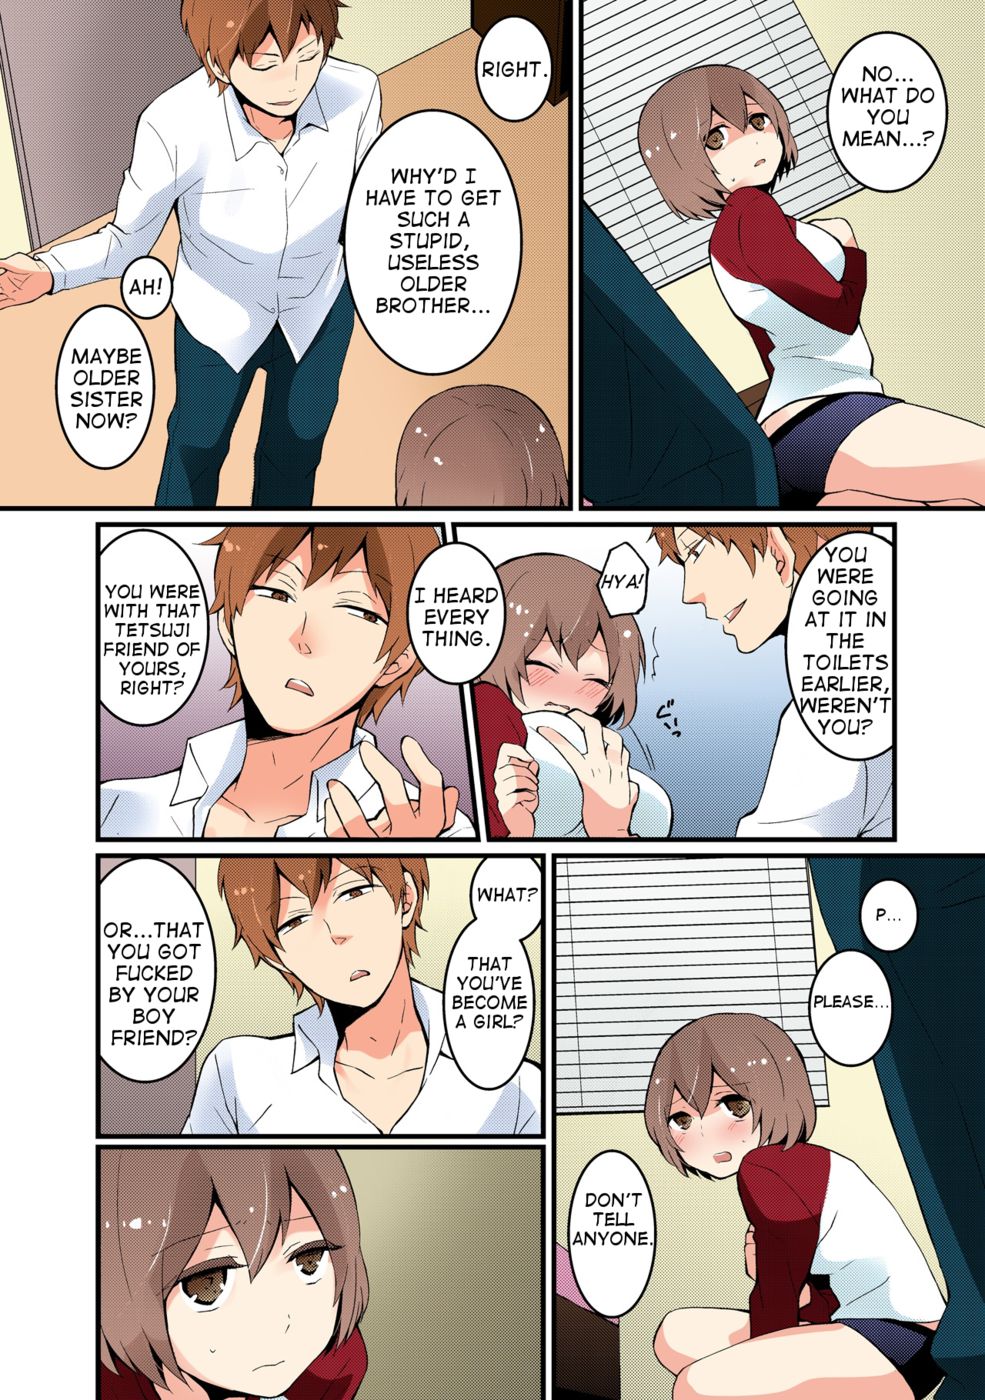 Hentail Guys Transformed Girle - Since I've Abruptly Turned Into a Girl, Won't You Fondle My Boobs?-Chapter  6-Hentai Manga Hentai Comic - Page: 4 - Online porn video at mobile